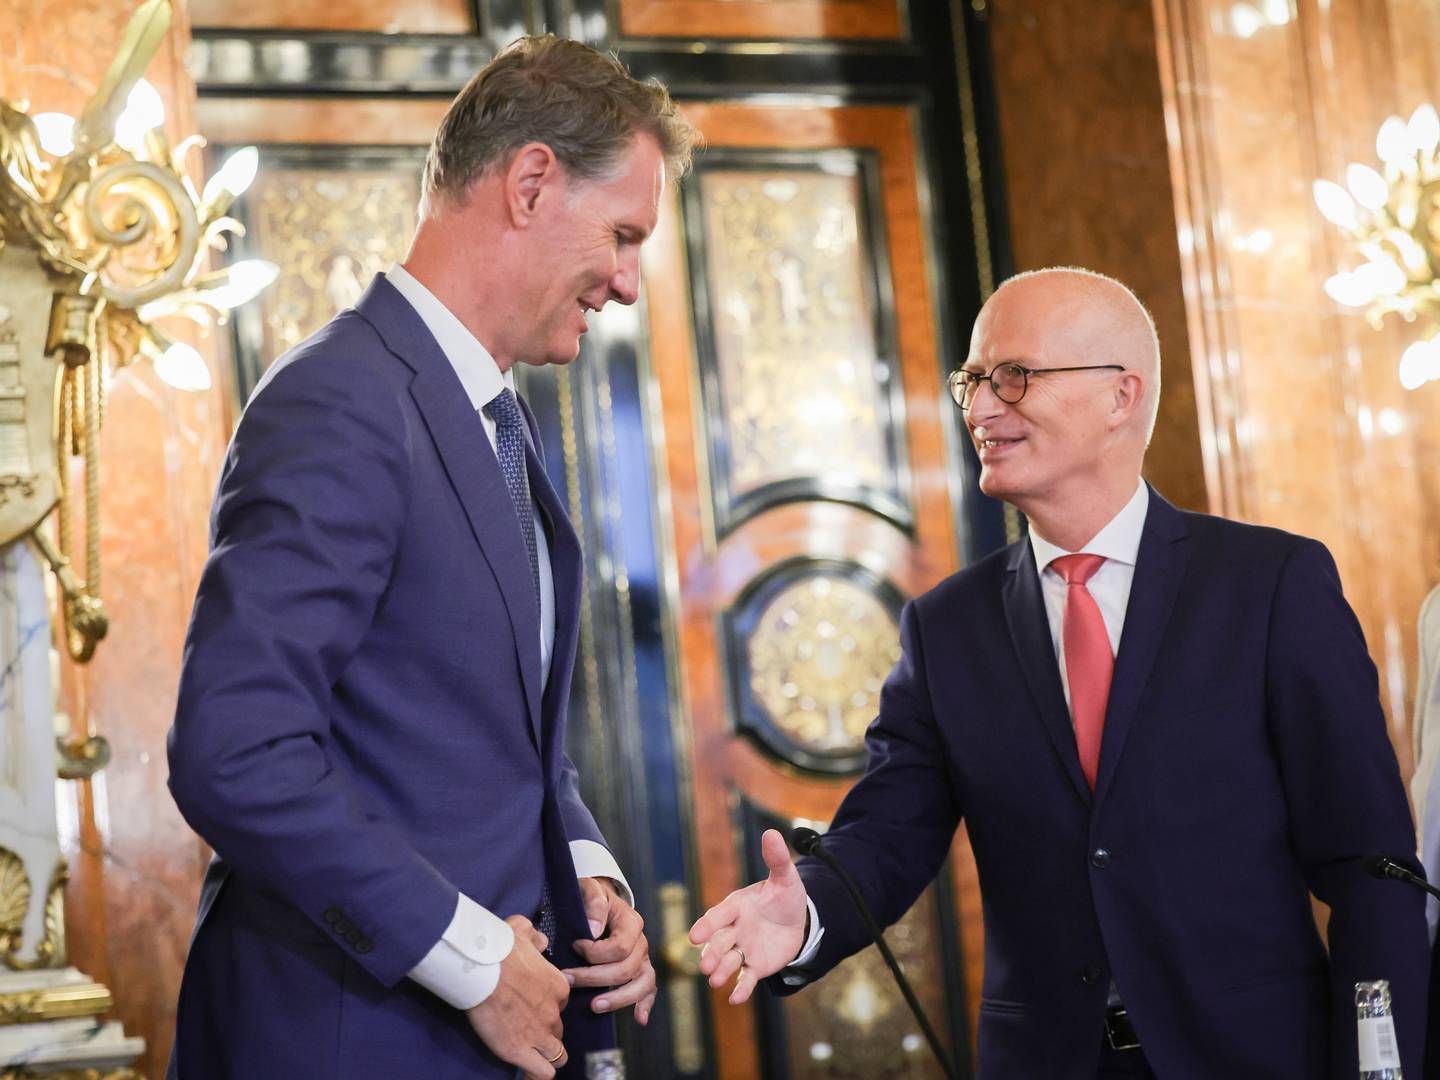 Søren Toft (left) and Hamburg's Social Democratic Lord Mayor, Peter Tschentscher (right), shake hands after the announcement of the sale of HHLA shares to MSC. | Photo: Christian Charisius/AP/Ritzau Scanpix